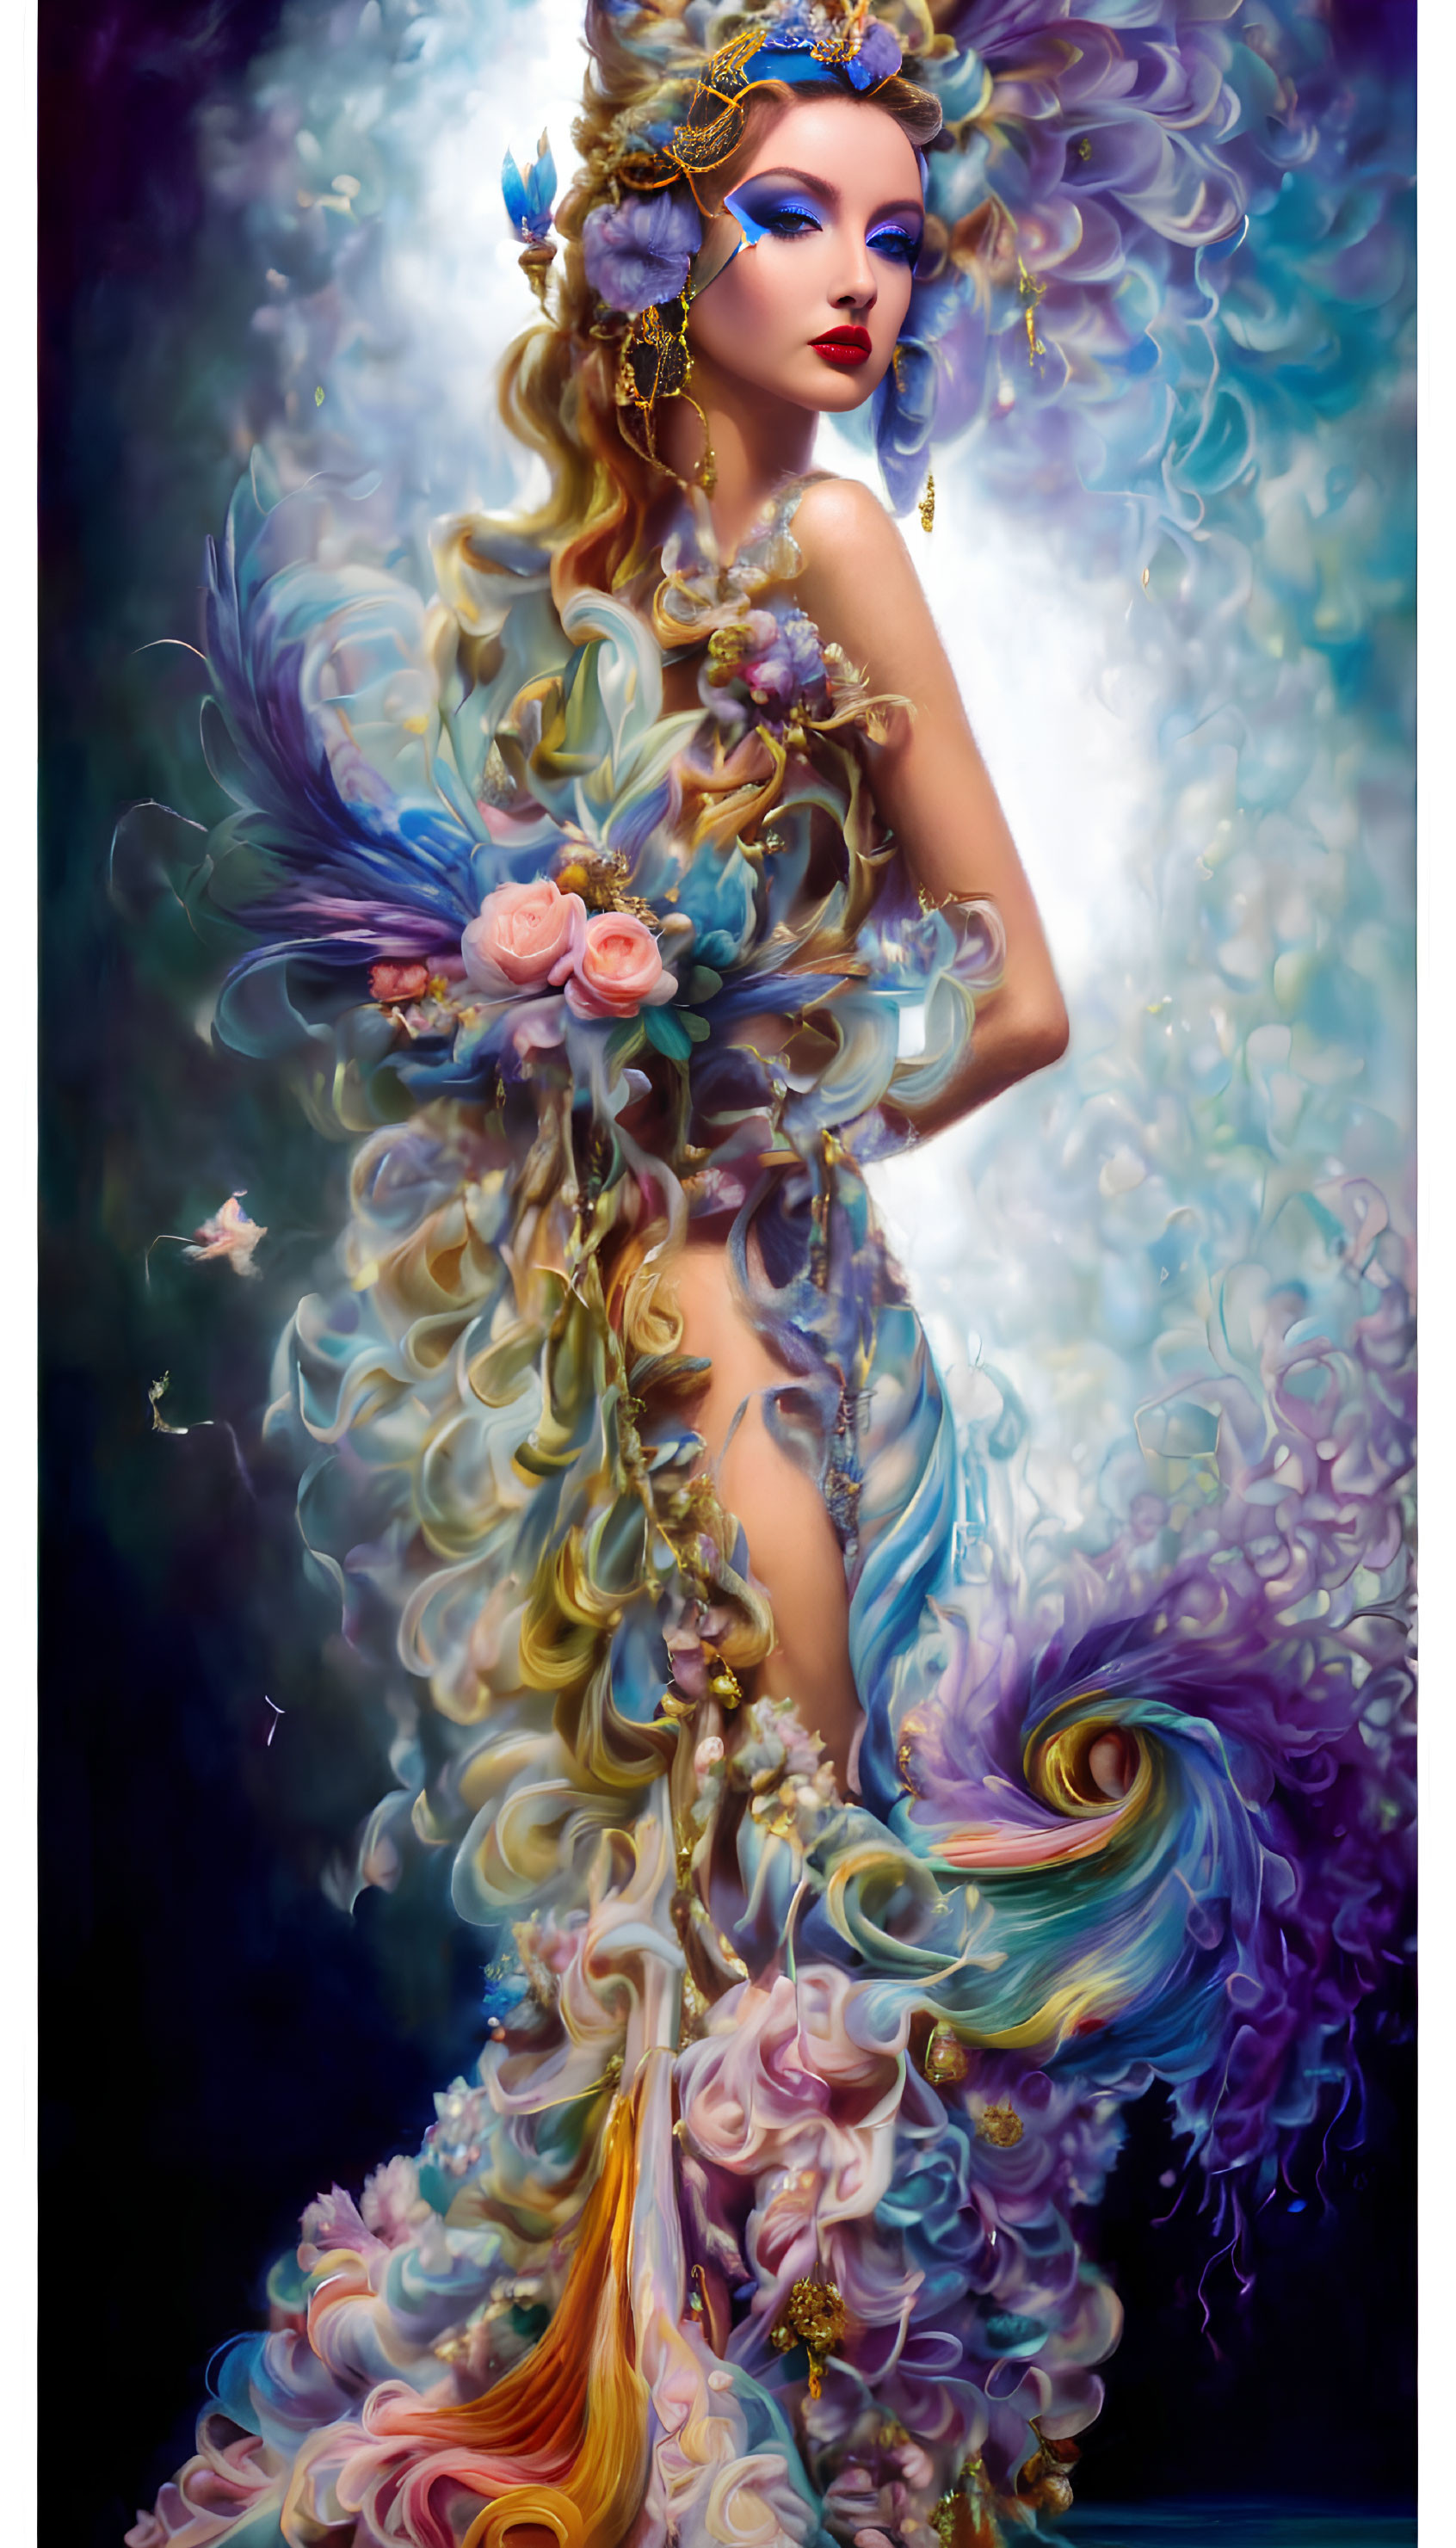 Colorful illustration of ethereal woman with elaborate hair and attire against dark backdrop